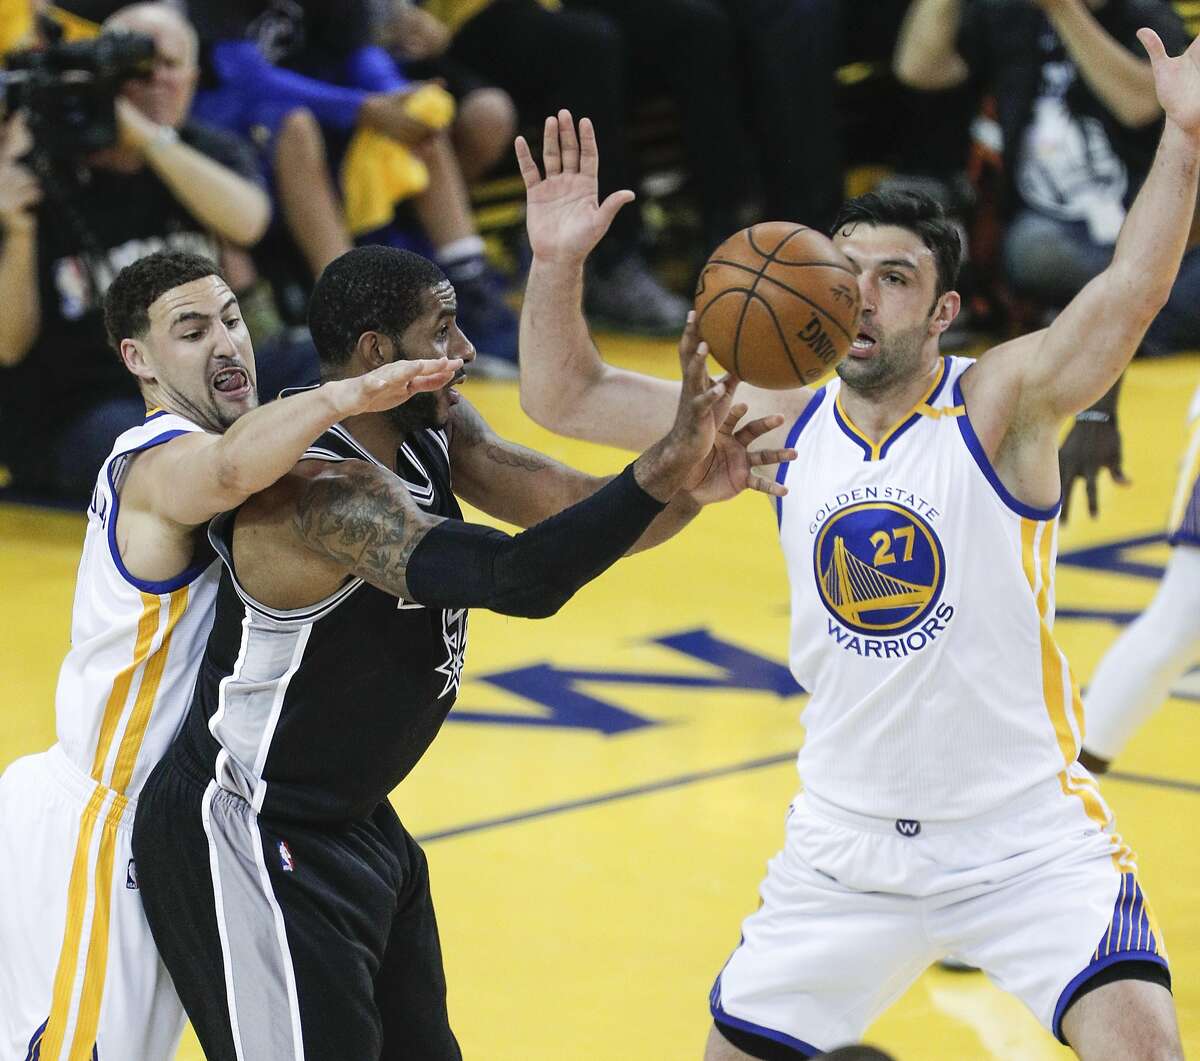 Golden State Warriors' Klay Thompson and Zaza Pachulia guard San Antonio Spurs' LaMarcus Aldridge in the first quarter during Game 2 of the 2017 NBA Playoffs Western Conference Finals at Oracle Arena on Tuesday, May 16, 2017 in Oakland, Calif.